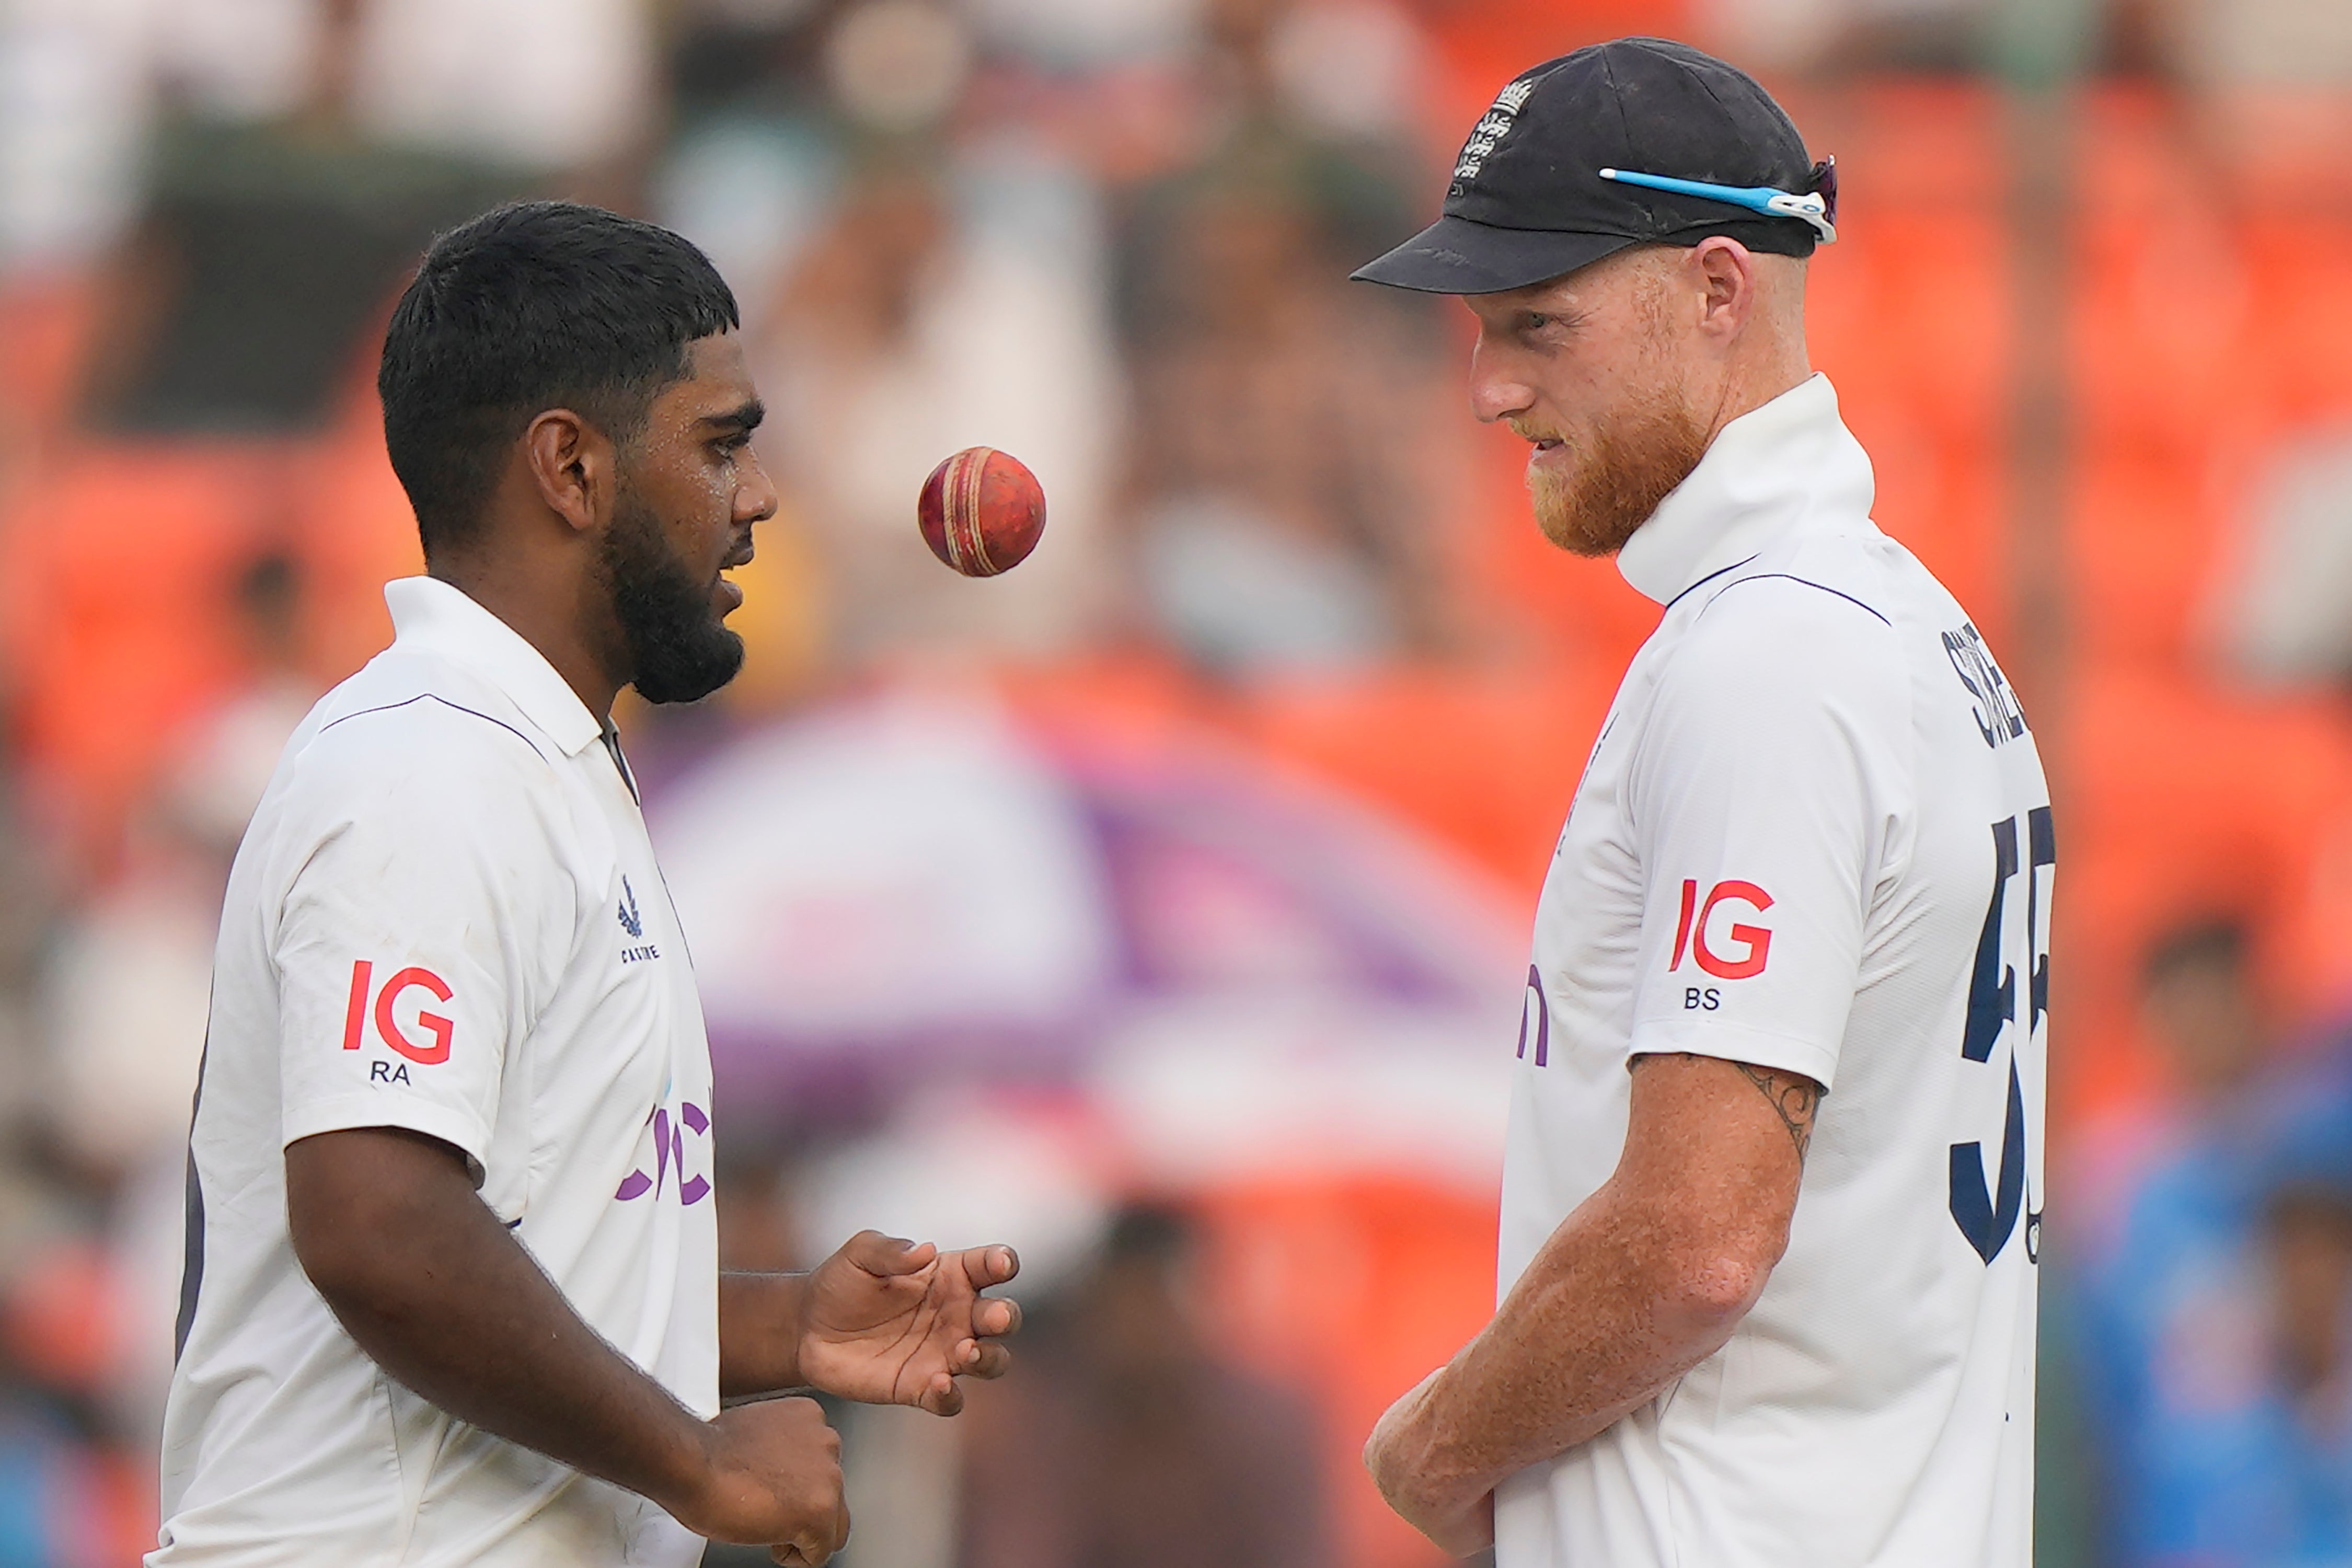 Ben Stokes did not consider dropping Rehan Ahmed despite visa issue